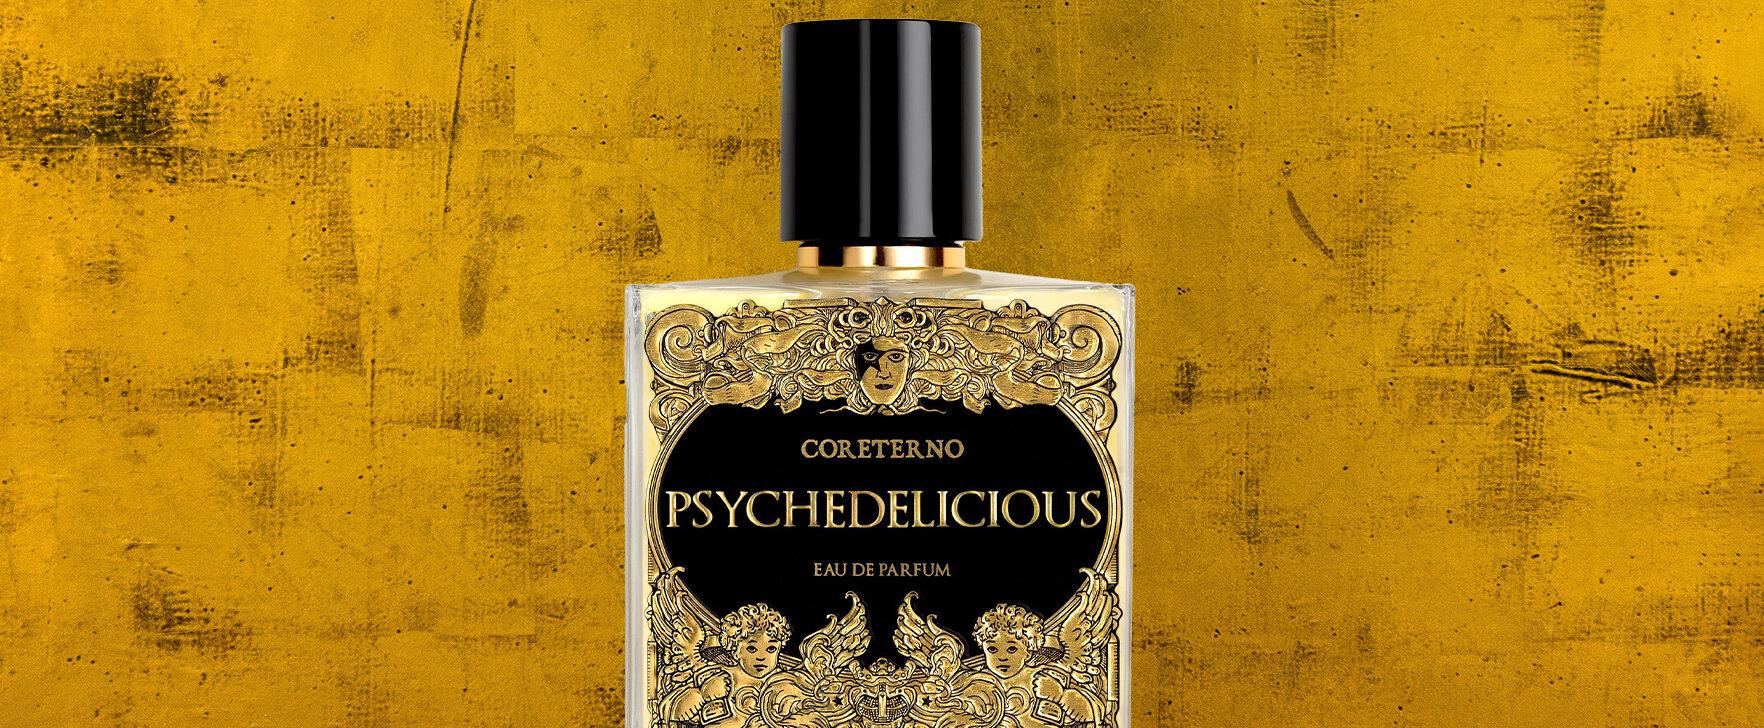 The New "Psychedelicious" Eau de Parfum by Coreterno: A Symphony of Berries and Flowers